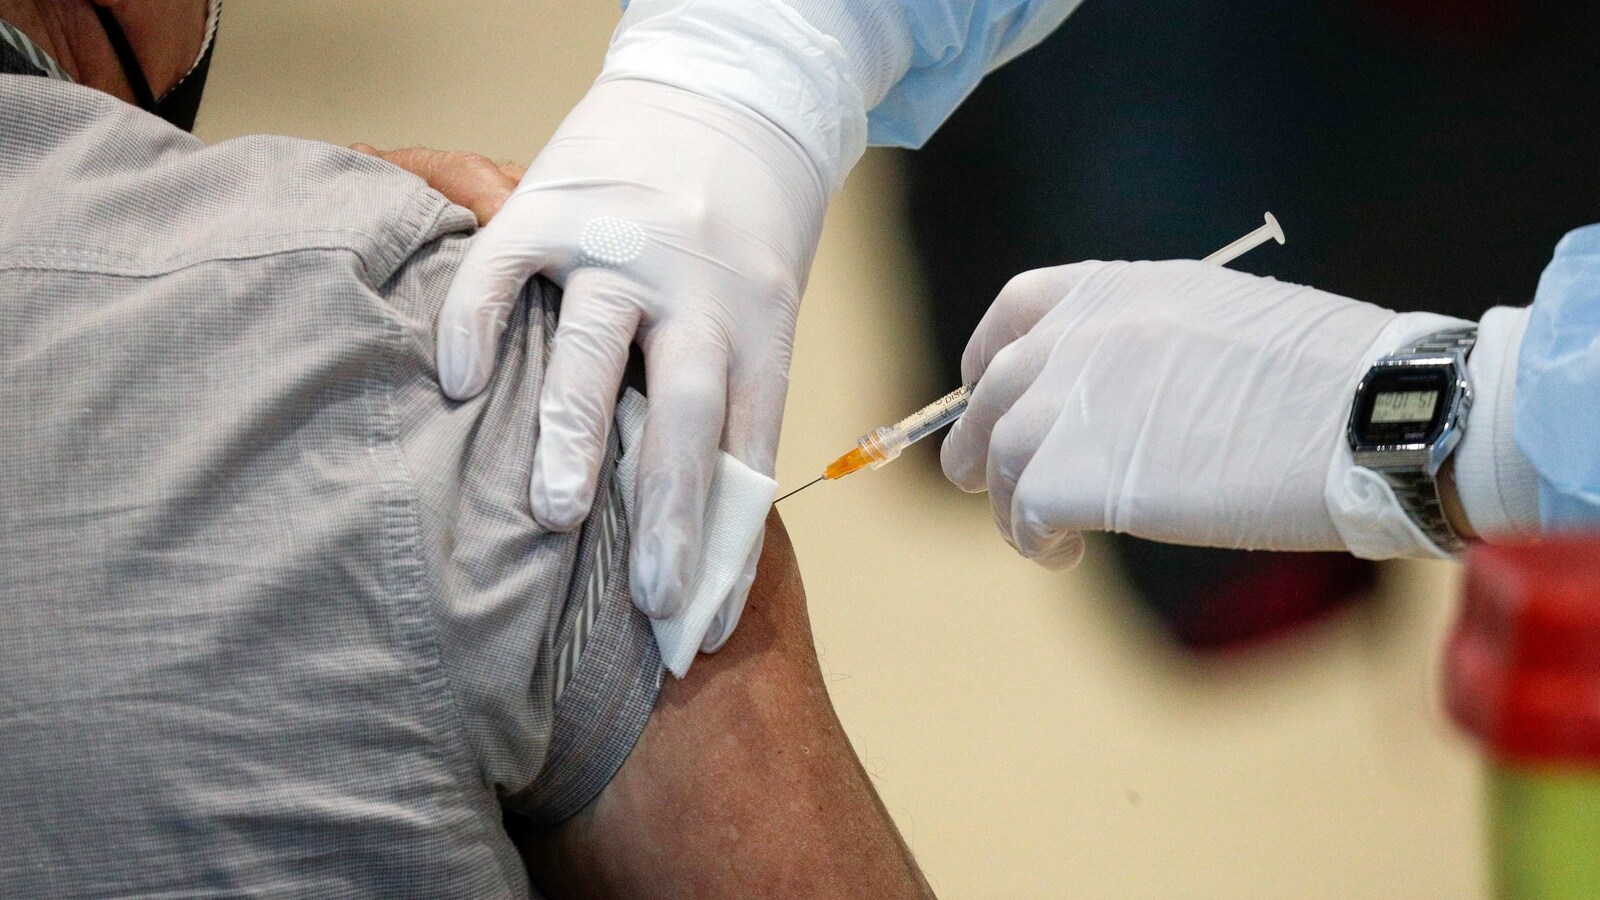 Covid-19 vaccine developed in Thailand begins human trials